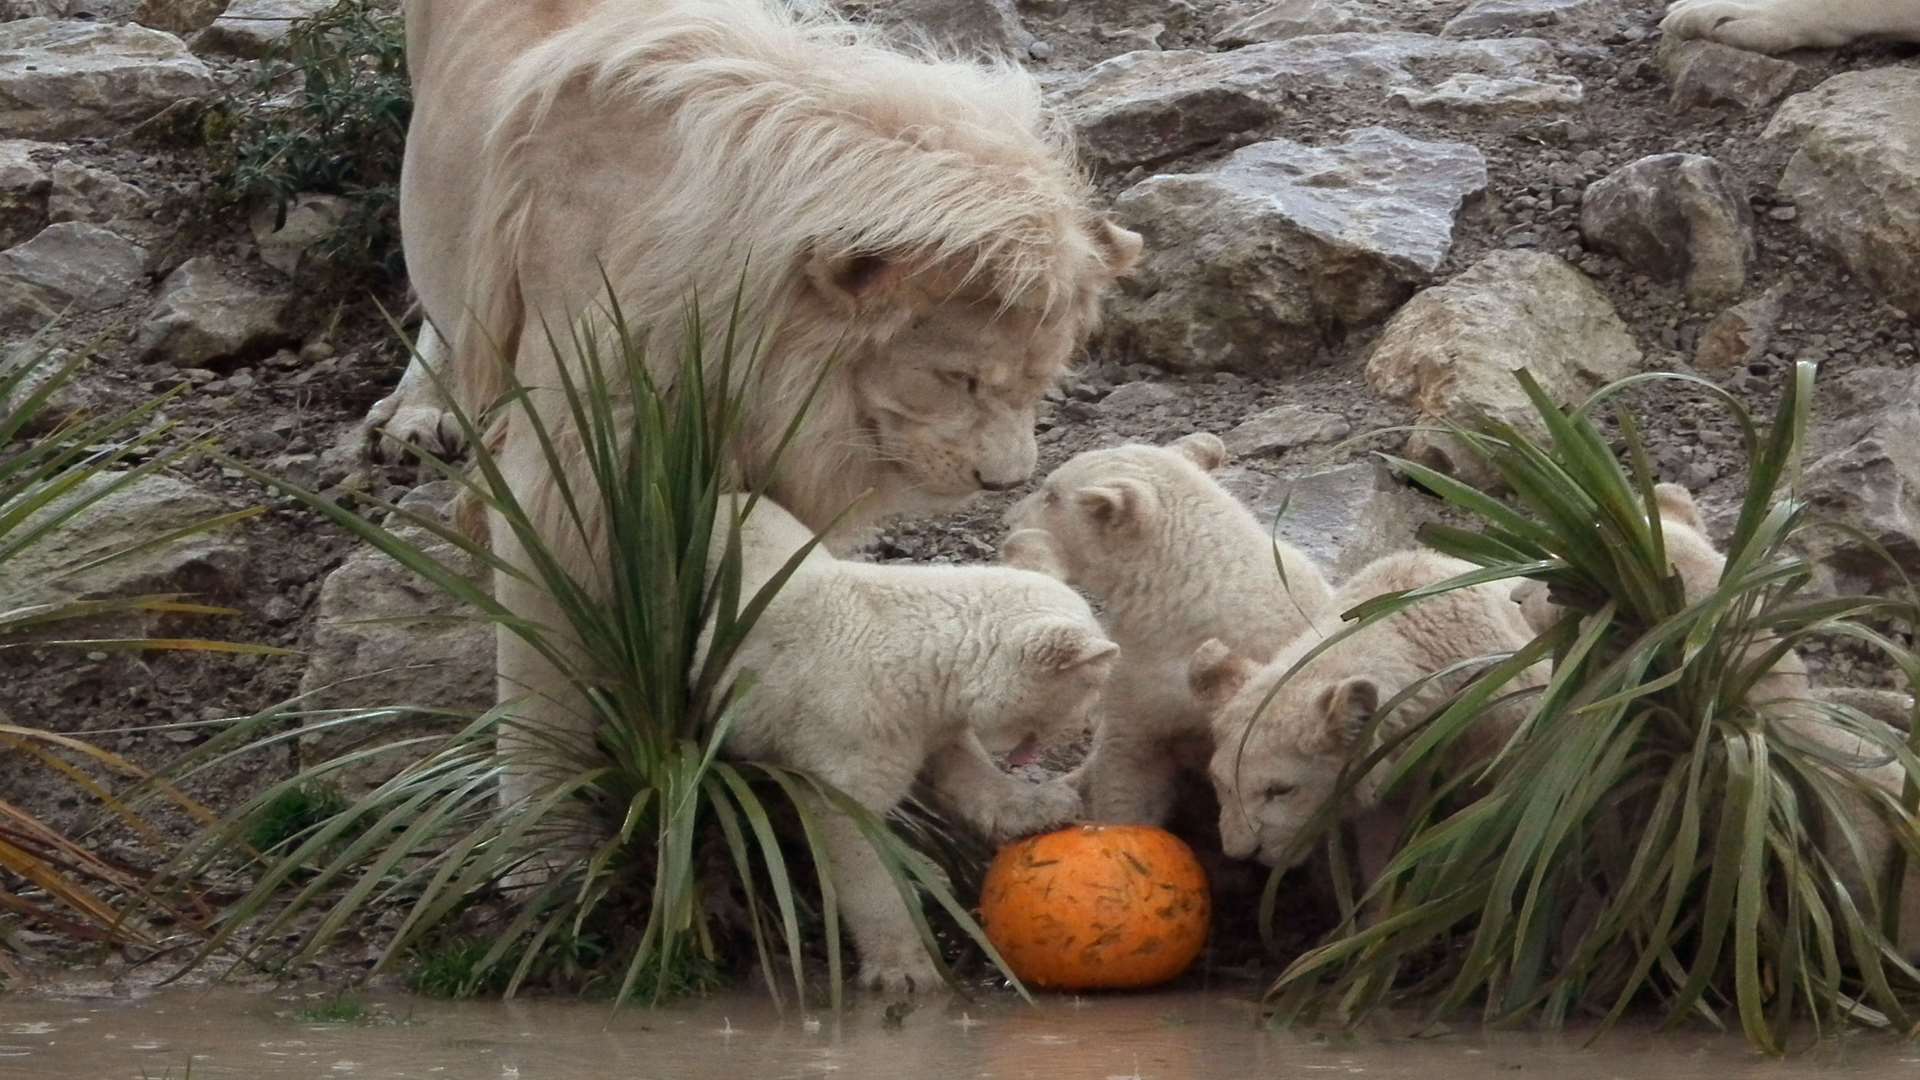 White lion Themba played with his cubs when they were young